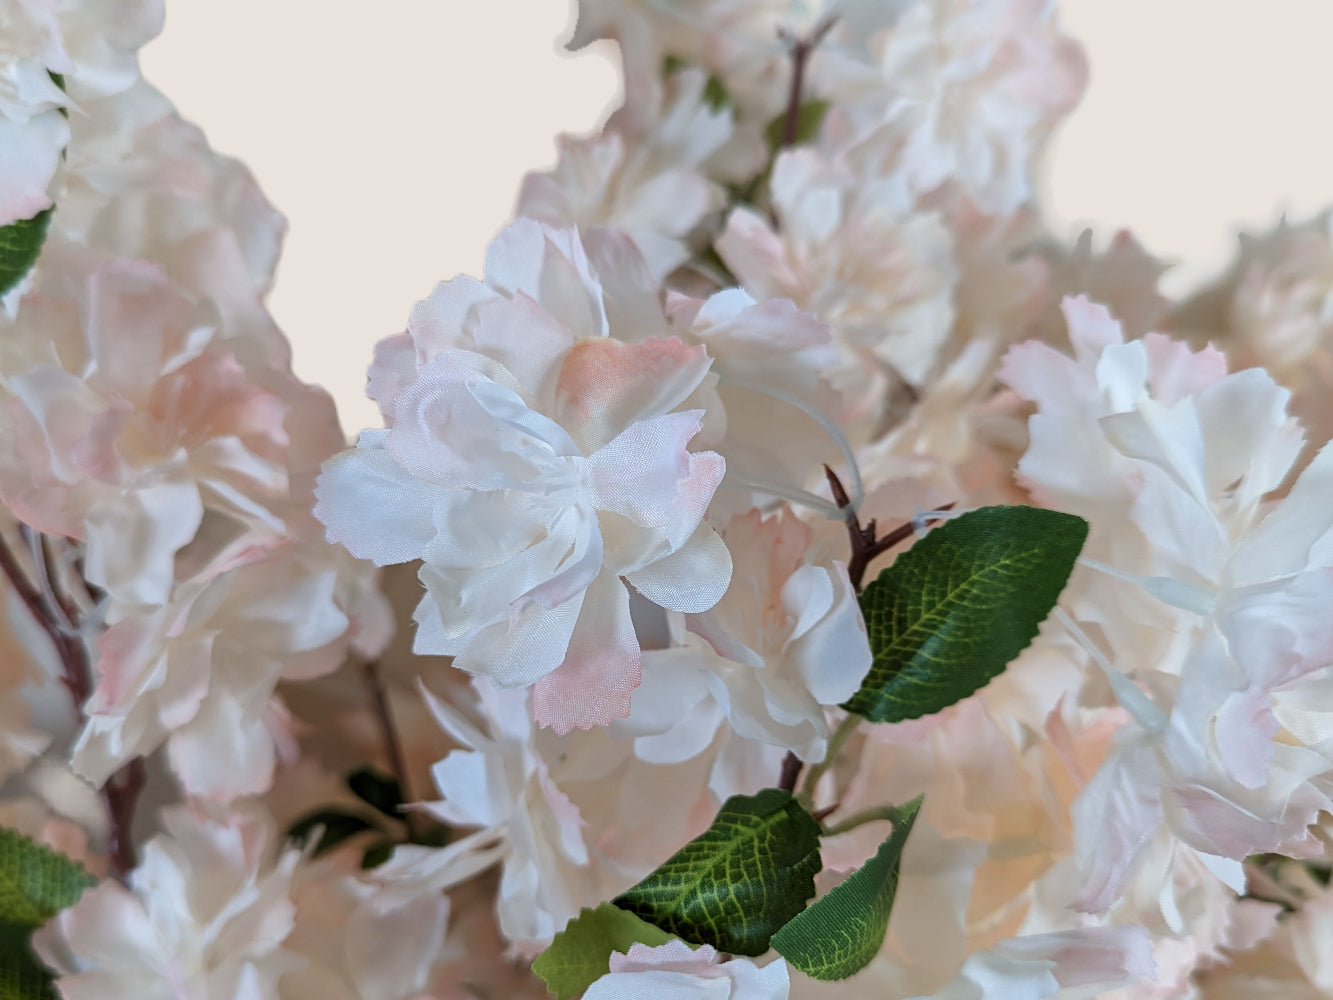 Artificial waterfall cherry blossom stem in soft pink and white, featuring a lifelike brown stem with three branches and fully bloomed big waterfall blossoms. Each branch is 38 inches tall in total, with 16 inches of stem and 22 inches of blossom branches. Pictured against a neutral beige background, this floral stem is perfect for adding a touch of elegance and beauty to any decor.